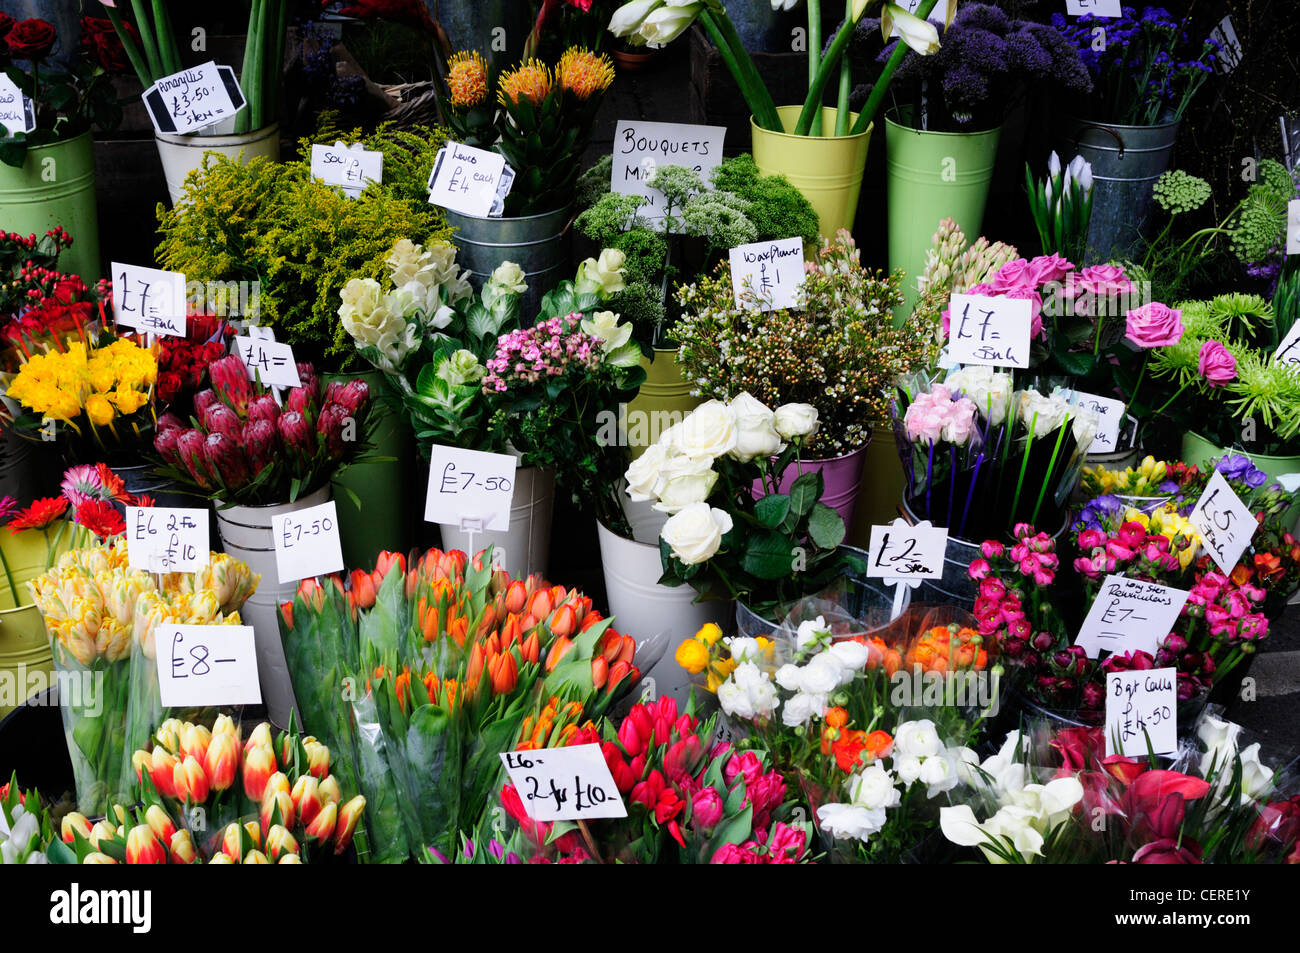 Flowers for sale from a florists stall at Borough market. Stock Photo